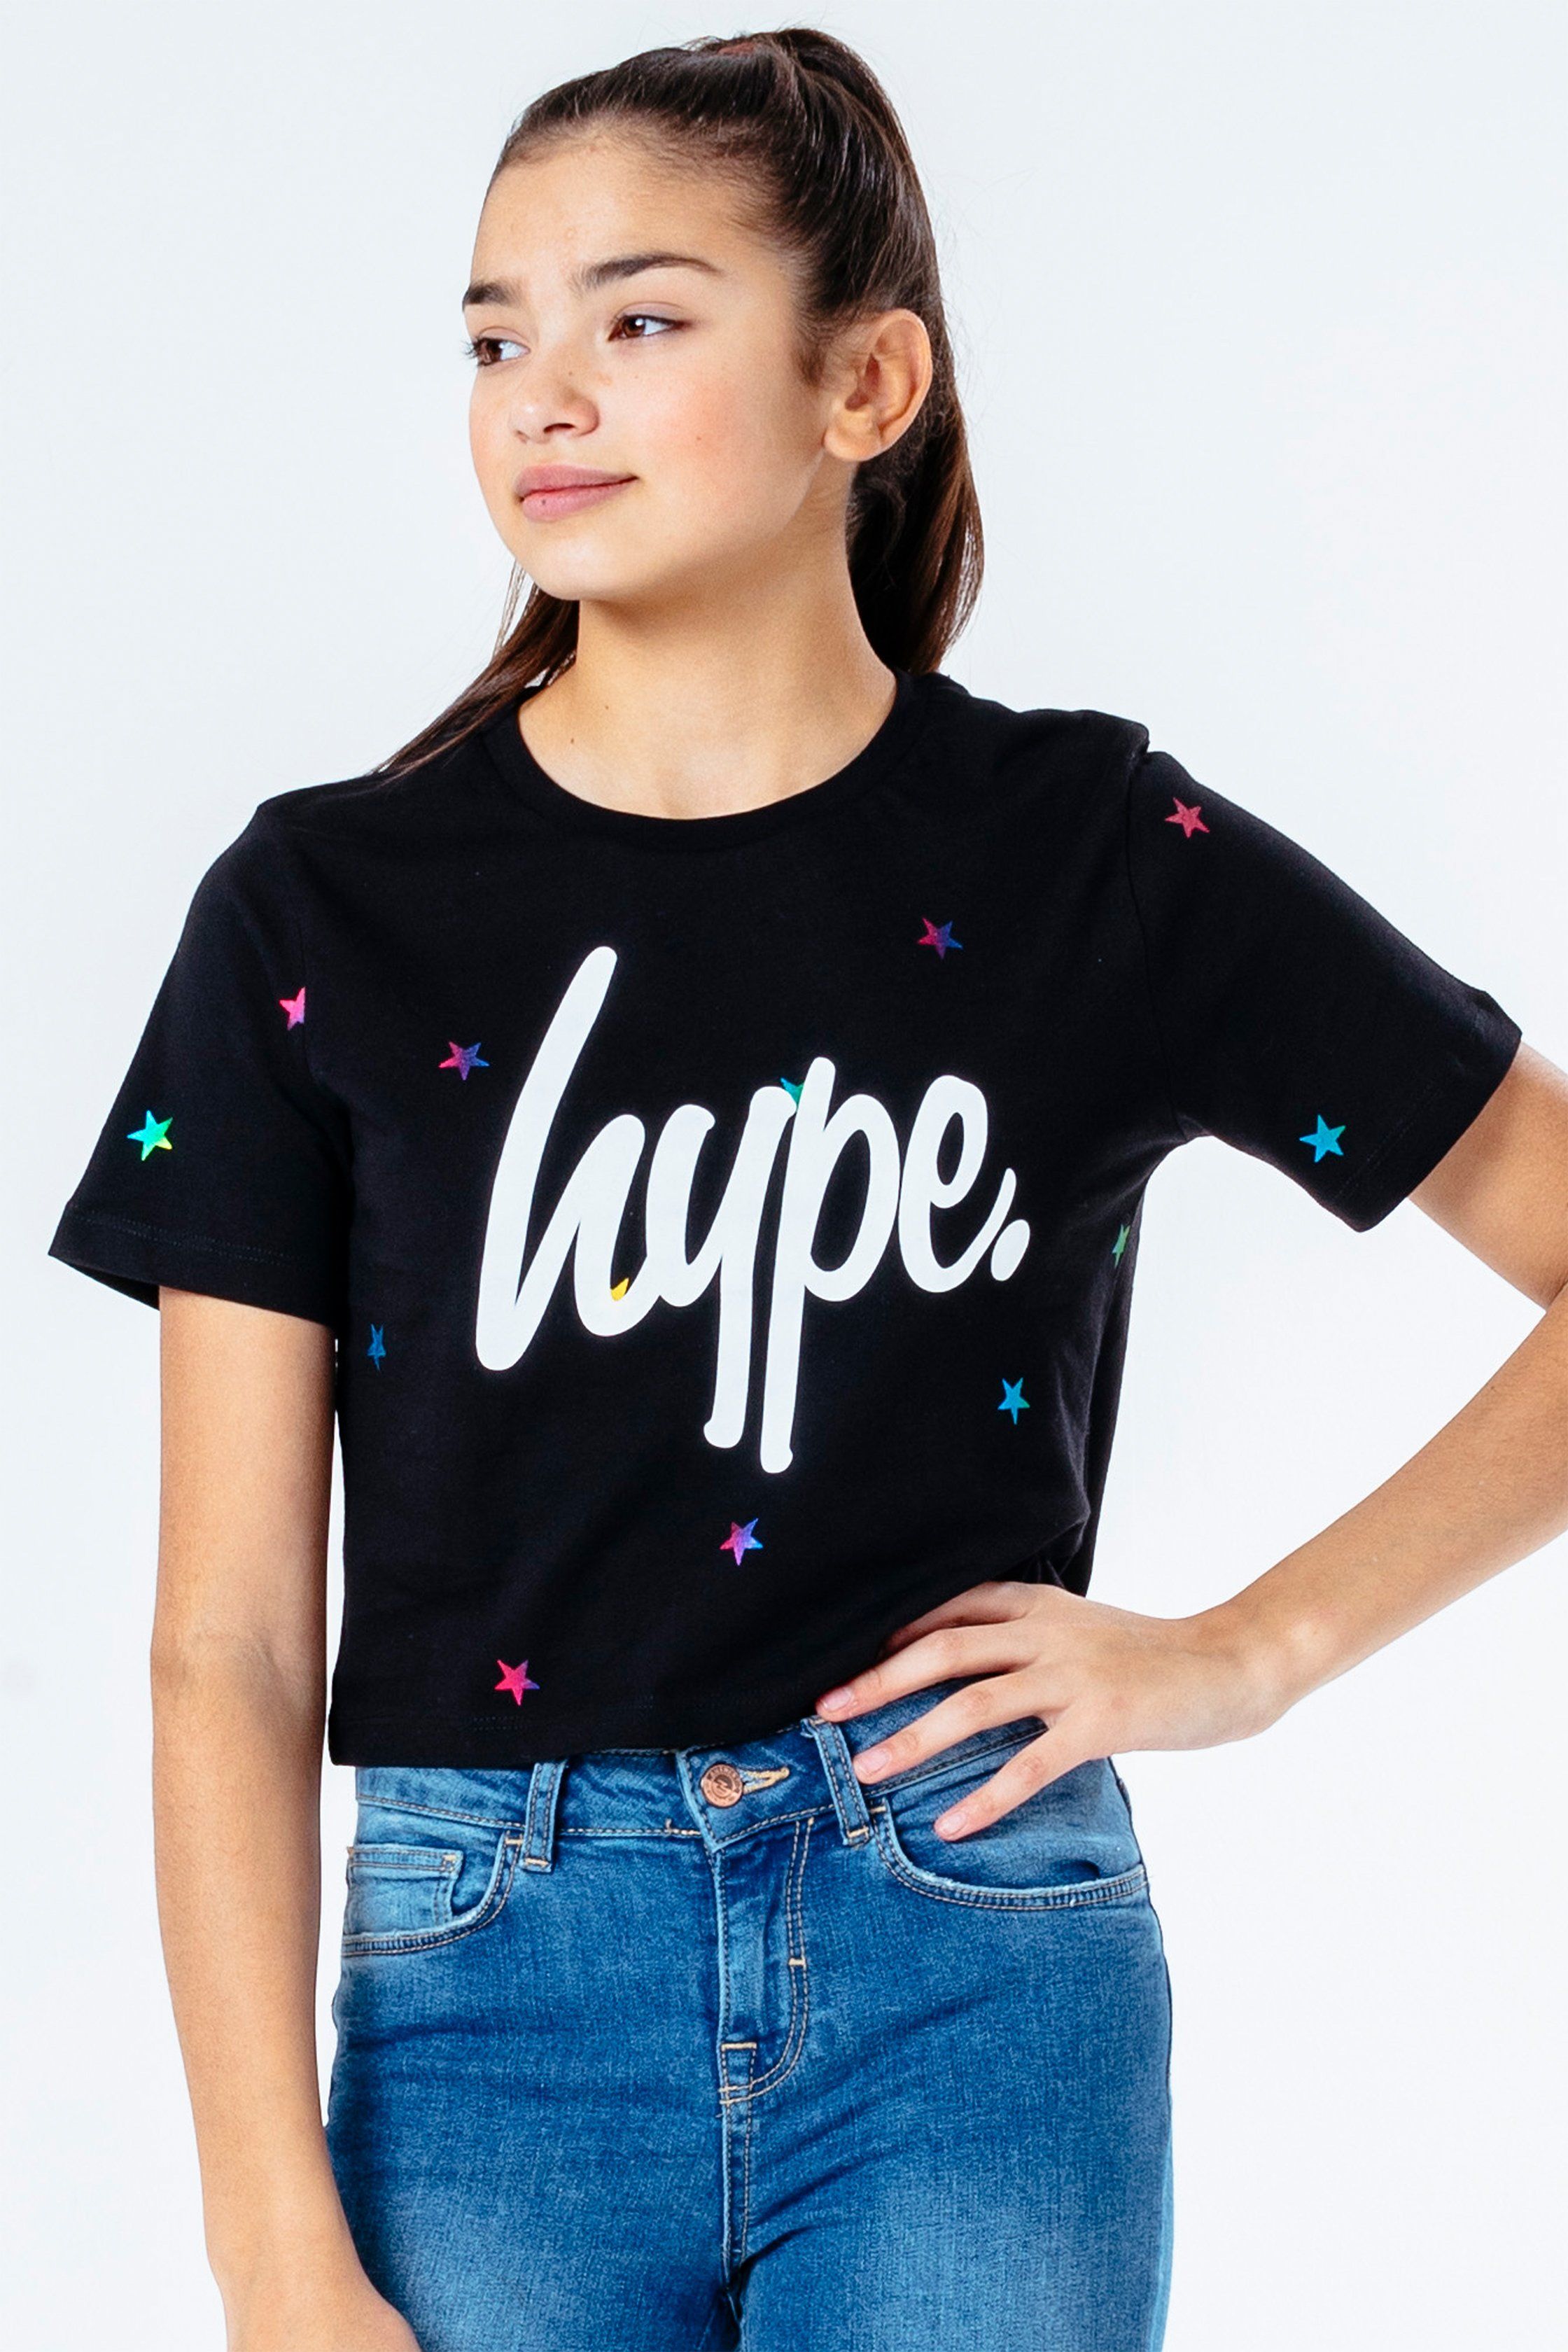 The HYPE. Magic Star Kids Crop T-Shirt is your new go-to tee. Designed in a black 100% cotton fabric base for supreme comfort in our standard crop t-shirt shape, highlighting a crew neck line and short sleeves. With an all-over star print in a rainbow transfer. Finished with the iconic HYPE. script logo in a contrasting white. Wear with the matching runner shorts to complete the look. Machine wash at 30 degrees.